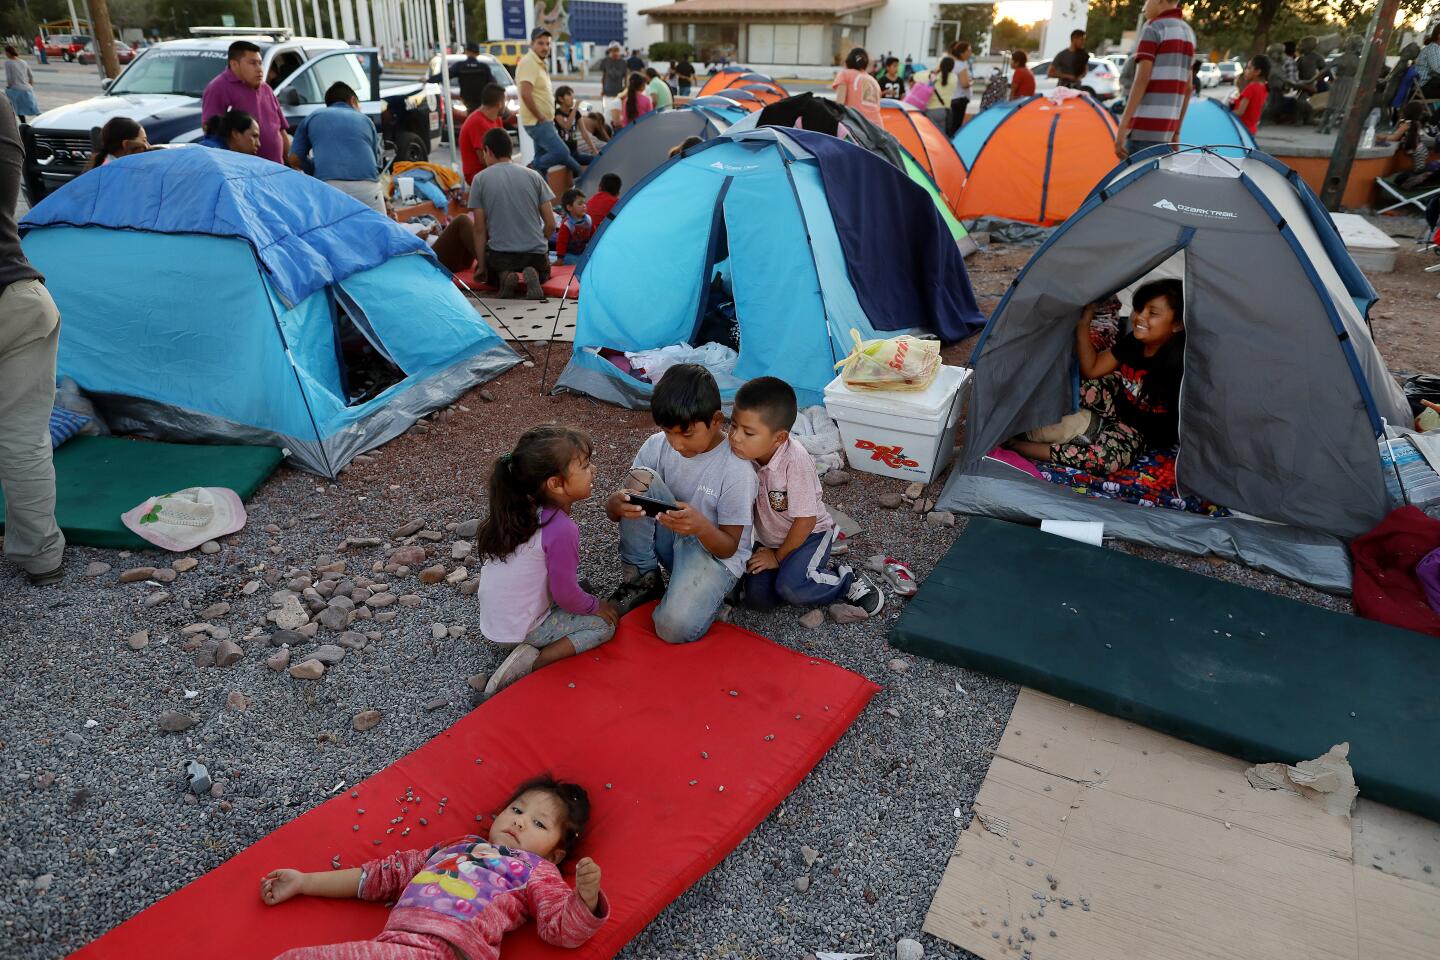 CIUDAD JUAREZ, CHIHUAHUA -- THURSDAY, SEPTEMBER 26, 2019: Mexicans seeking political asylum camp near the Bridge of the Americas international port of entry in Ciudad Juarez, Chihuahua, on Sept. 26, 2019. In Juarez, at least 1,000 Mexican migrants were camped at three border bridges last week, according to a briefing by officials from the State Population Council. The increase of organized crime and extortion in Mexico has led to and increase in Mexicans seeking political asylum. (Gary Coronado / Los Angeles Times)